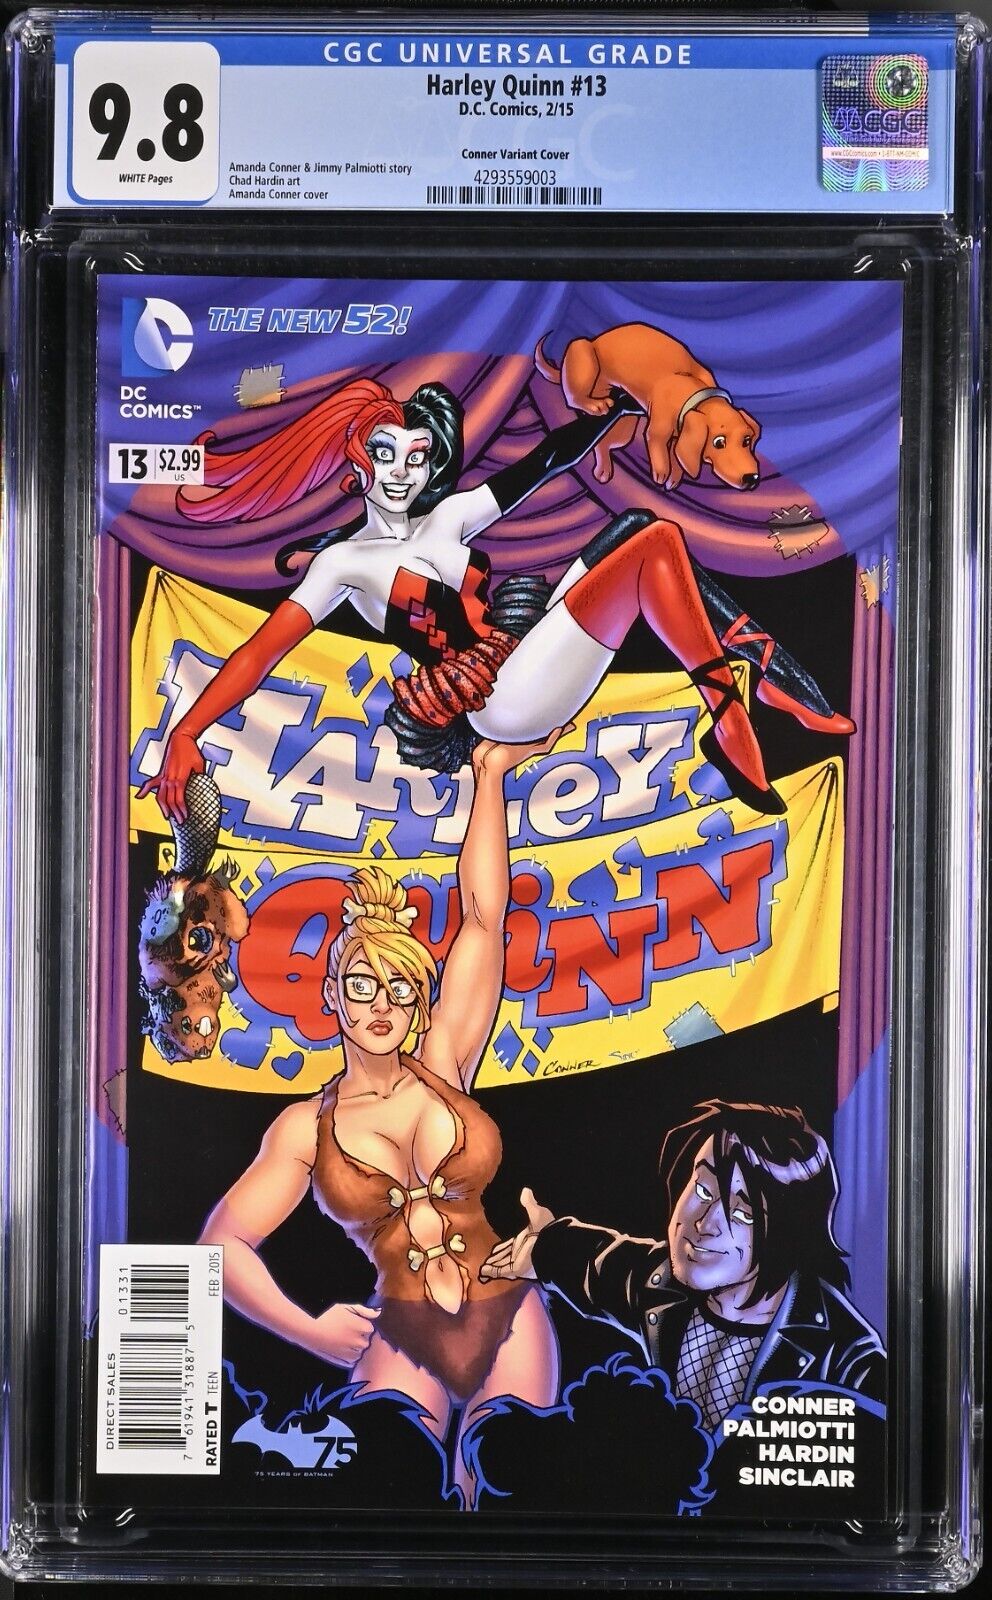 Harley Quinn #13 CGC 9.8 Power Girl 1:25 Retail Incentive Variant Cover 2015 DC